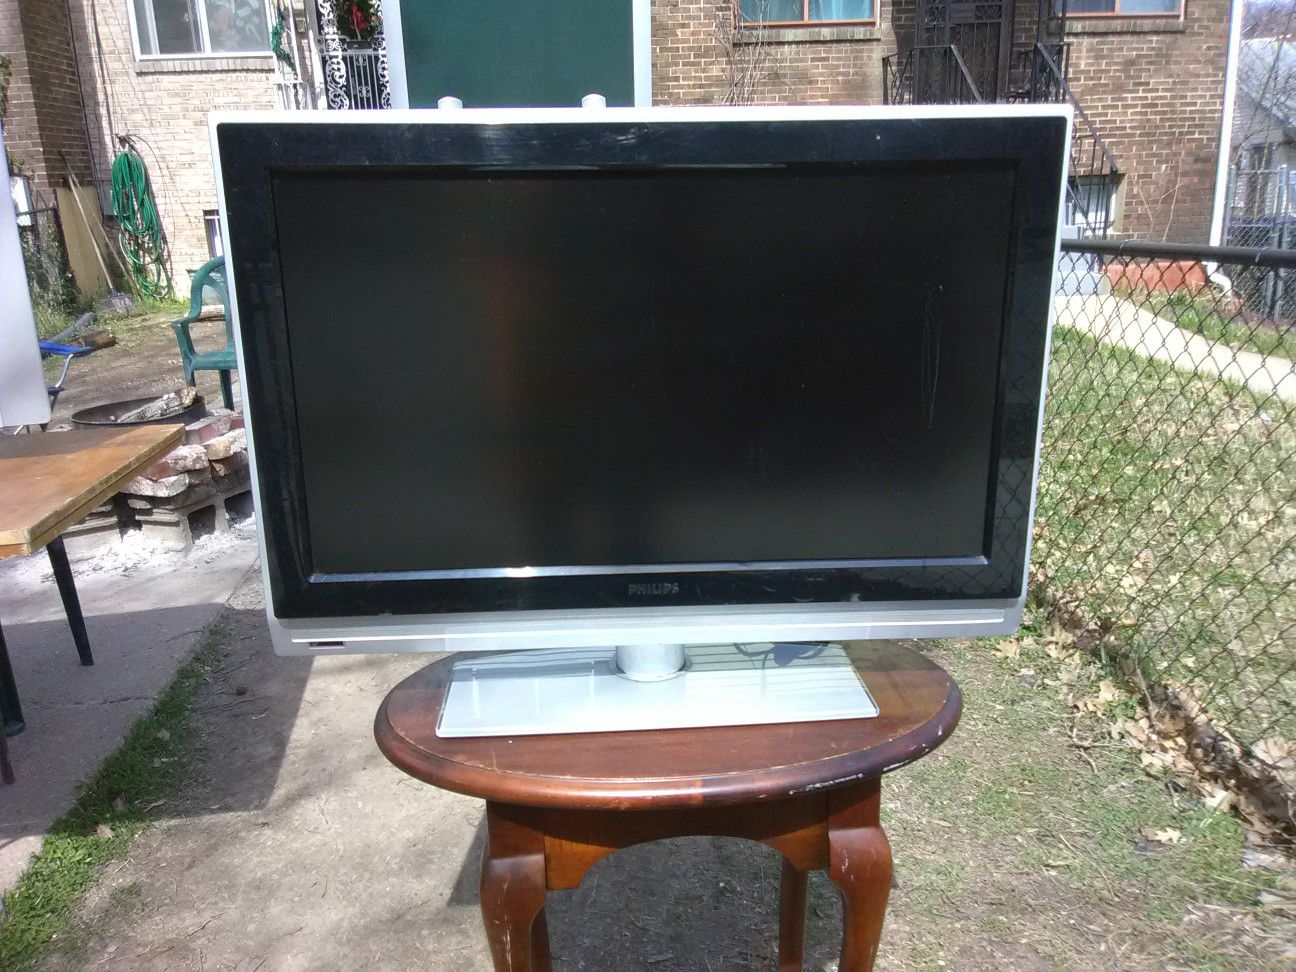 Phillips 32 inch LCD TV with HDMI port